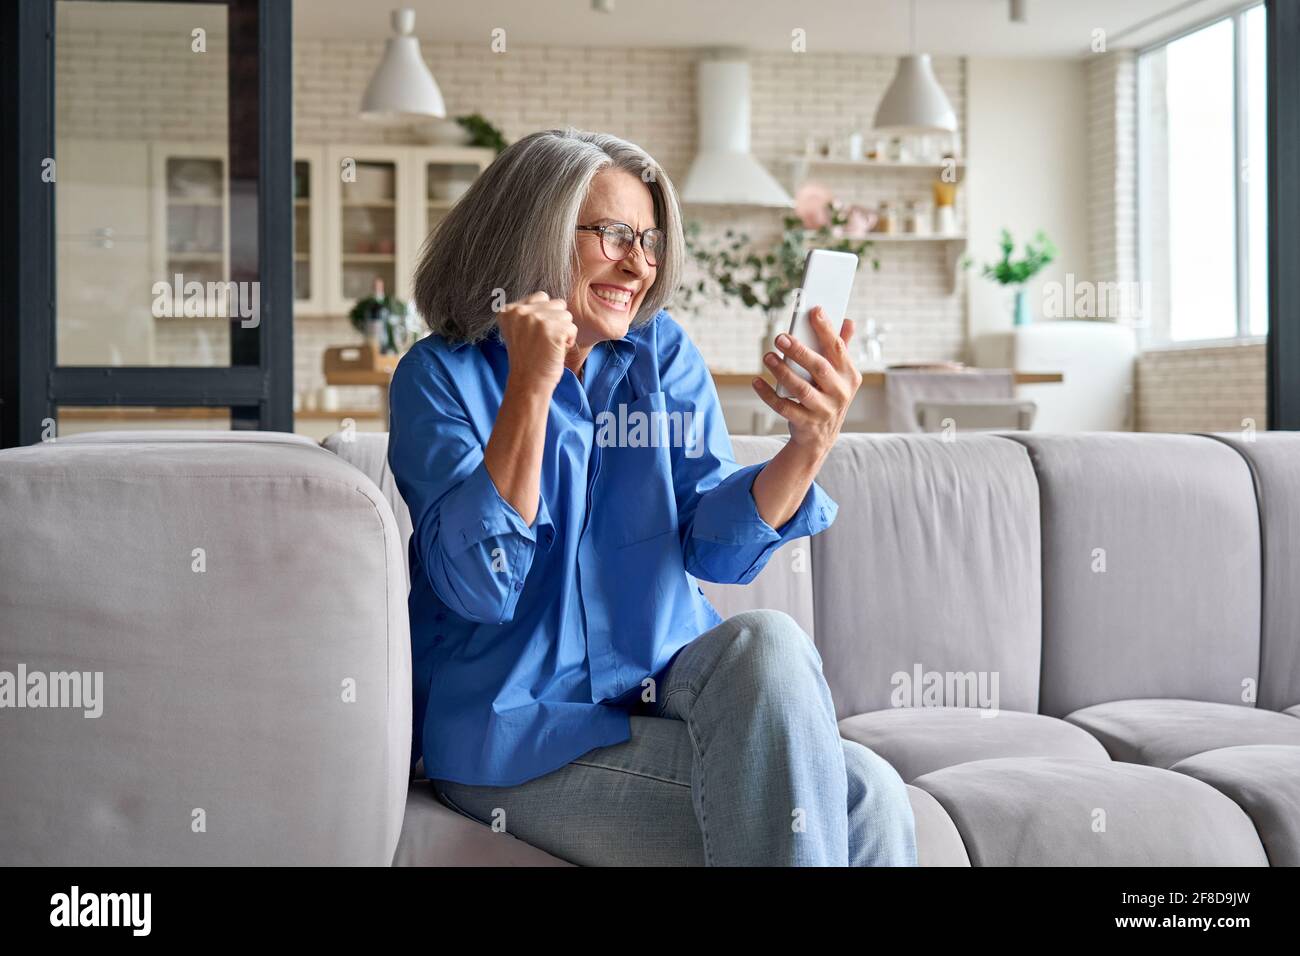 Surprised exited mature woman 60s aged at home with cellphone. Stock Photo